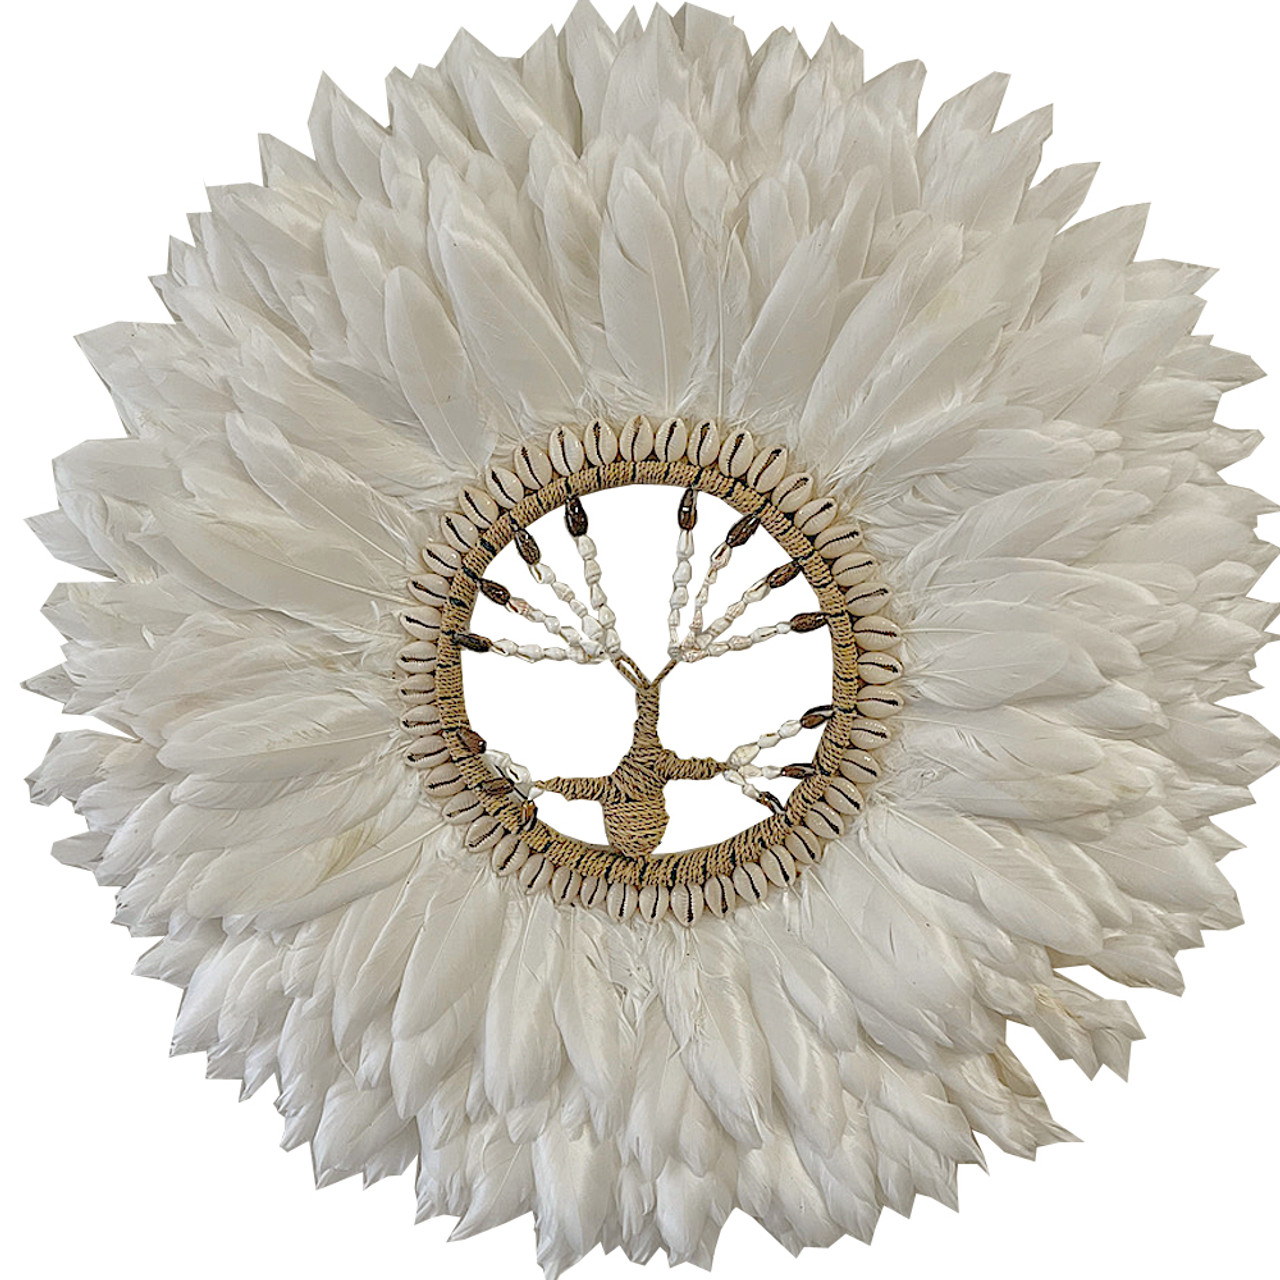 Wall Hanging Juju shell , wood bead & feather  Tree of Life
50cm feather diameter